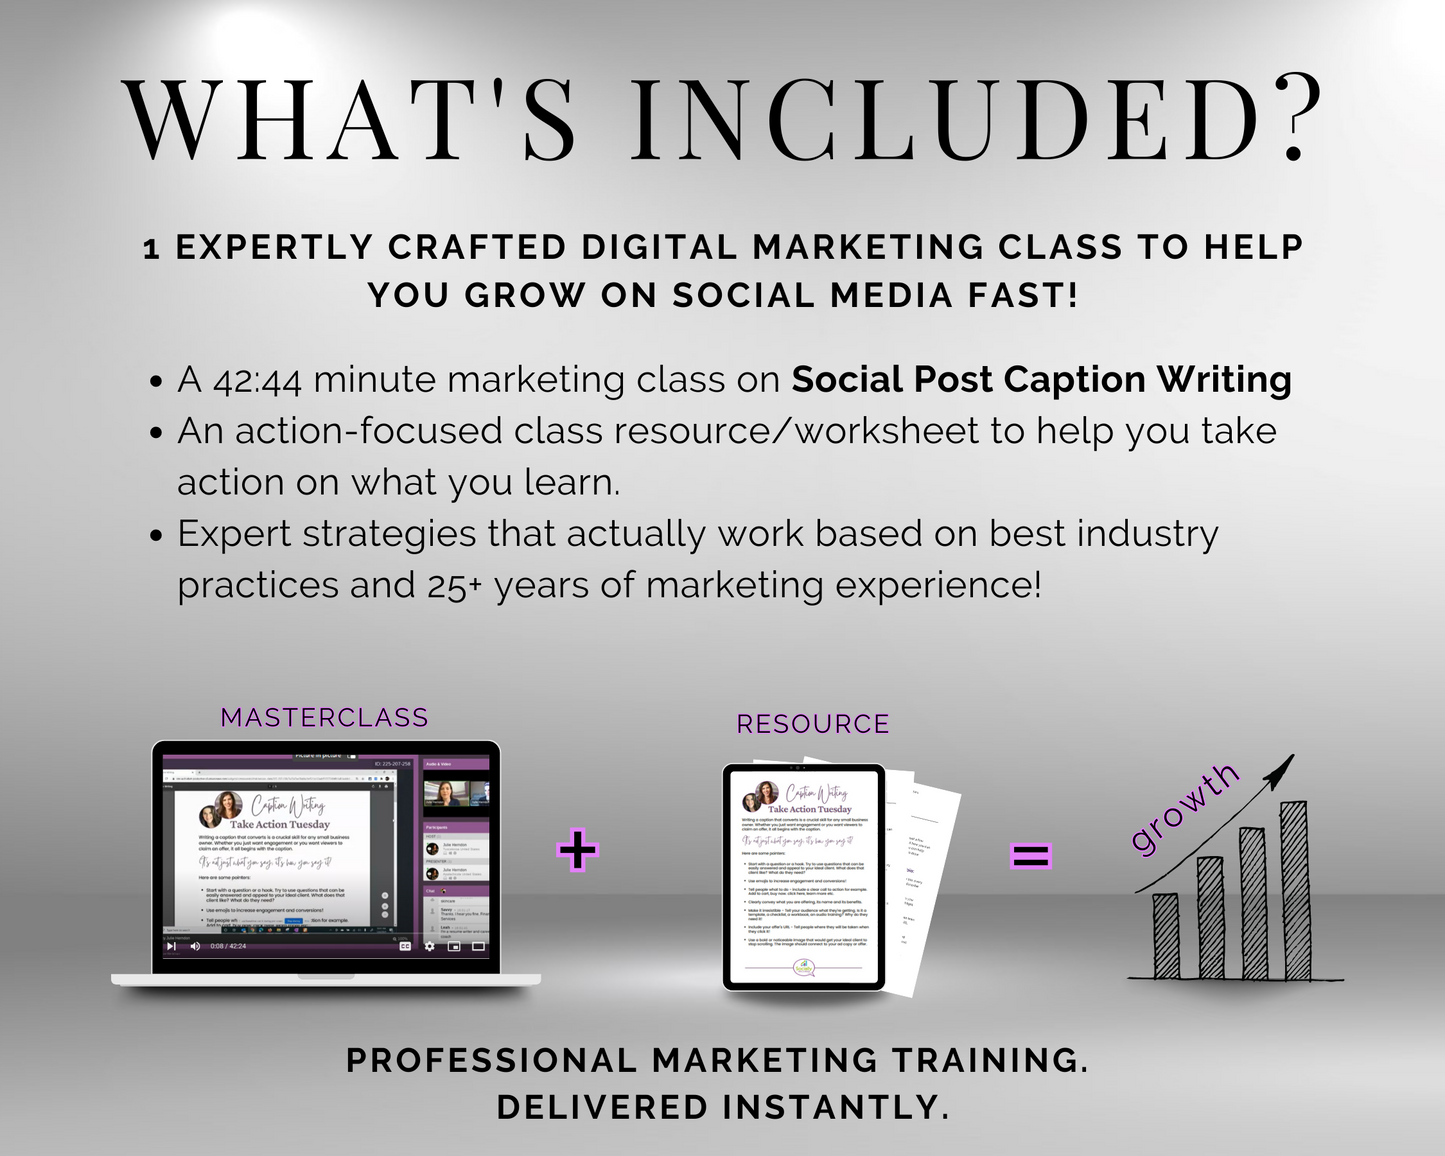 The TAT - Social Post Caption Writing Masterclass by Get Socially Inclined includes a comprehensive overview of essential marketing strategies and techniques.